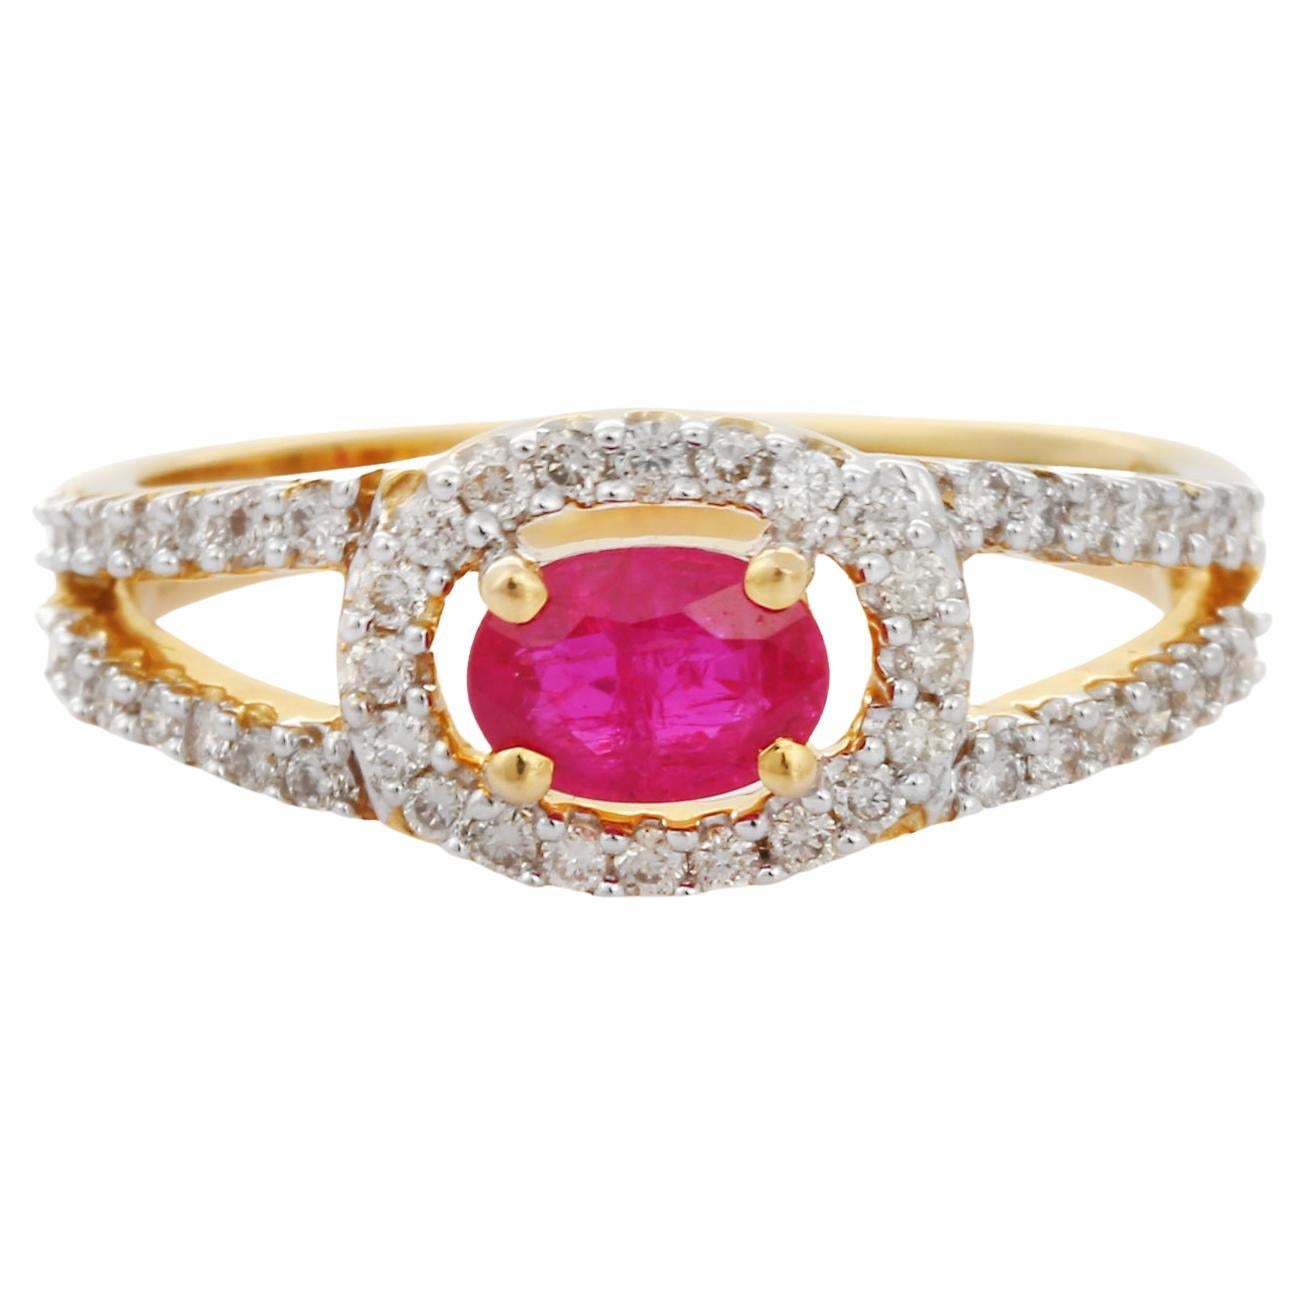 For Sale:  18K Yellow Gold Center Oval Cut Ruby Wedding Ring with Halo of Diamonds